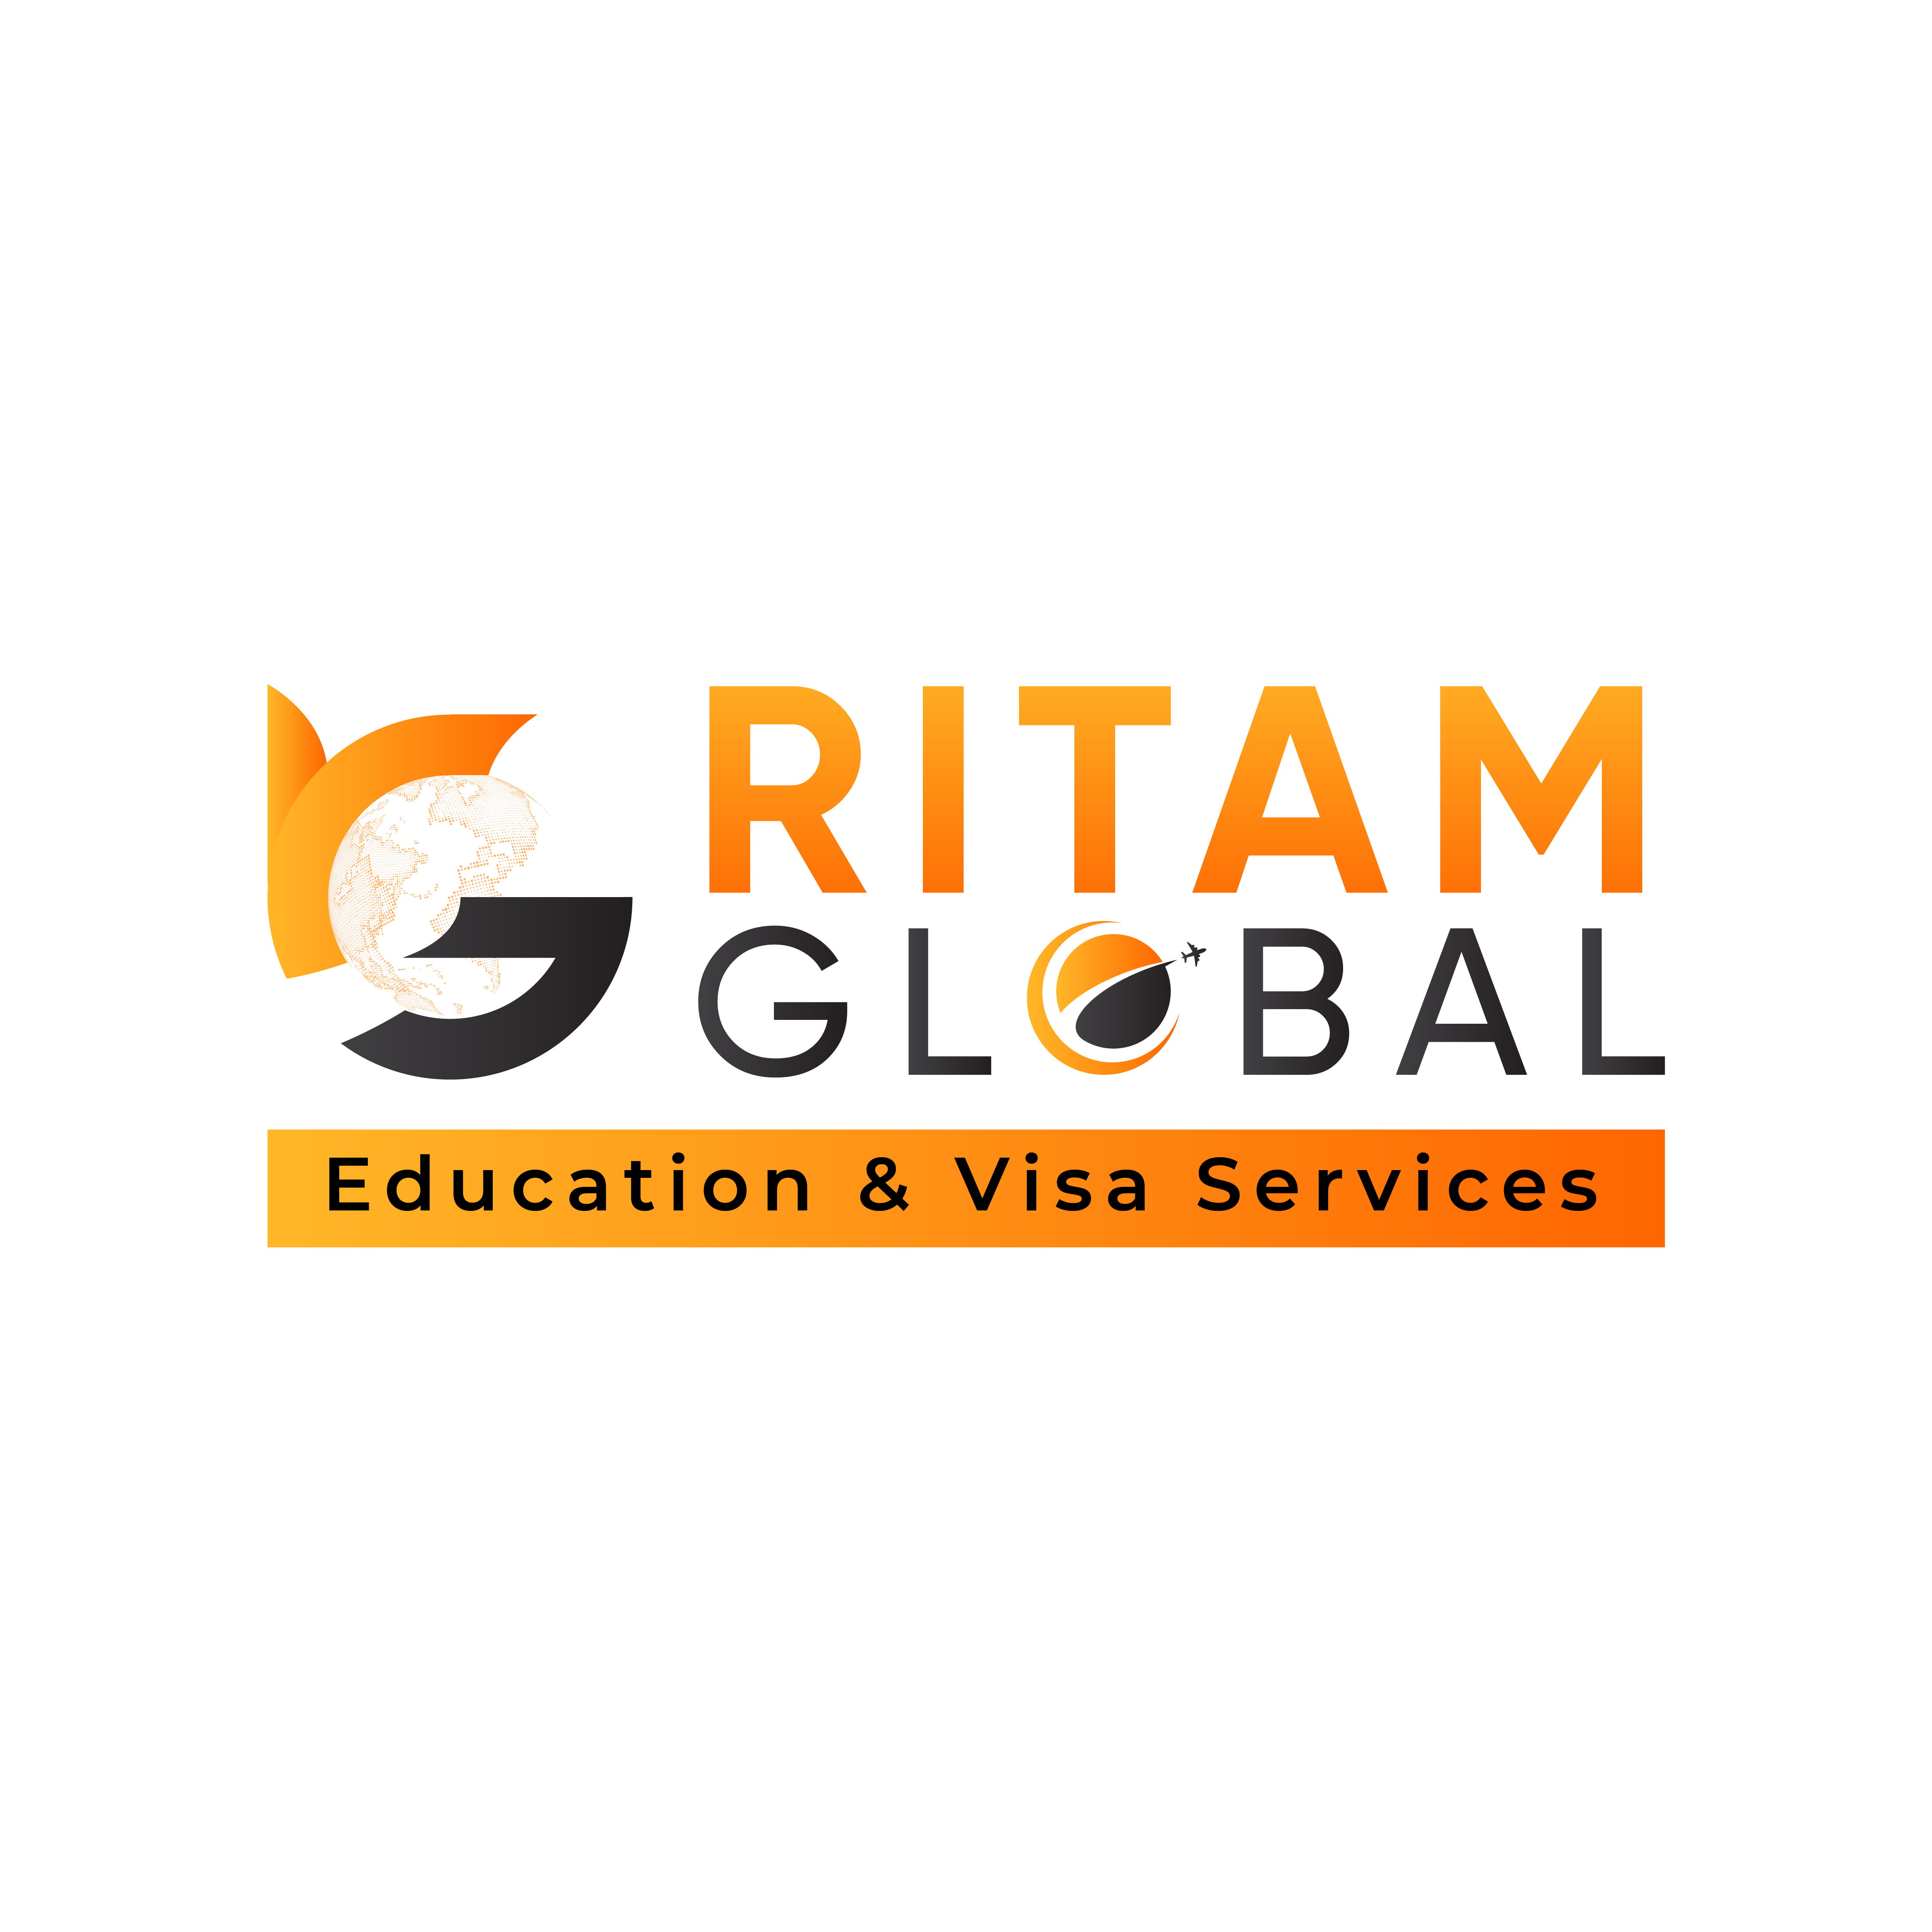 ritam global bhutan - study abroad consultants - overseas education consultantsritam global bhutan | educational services in thimphu